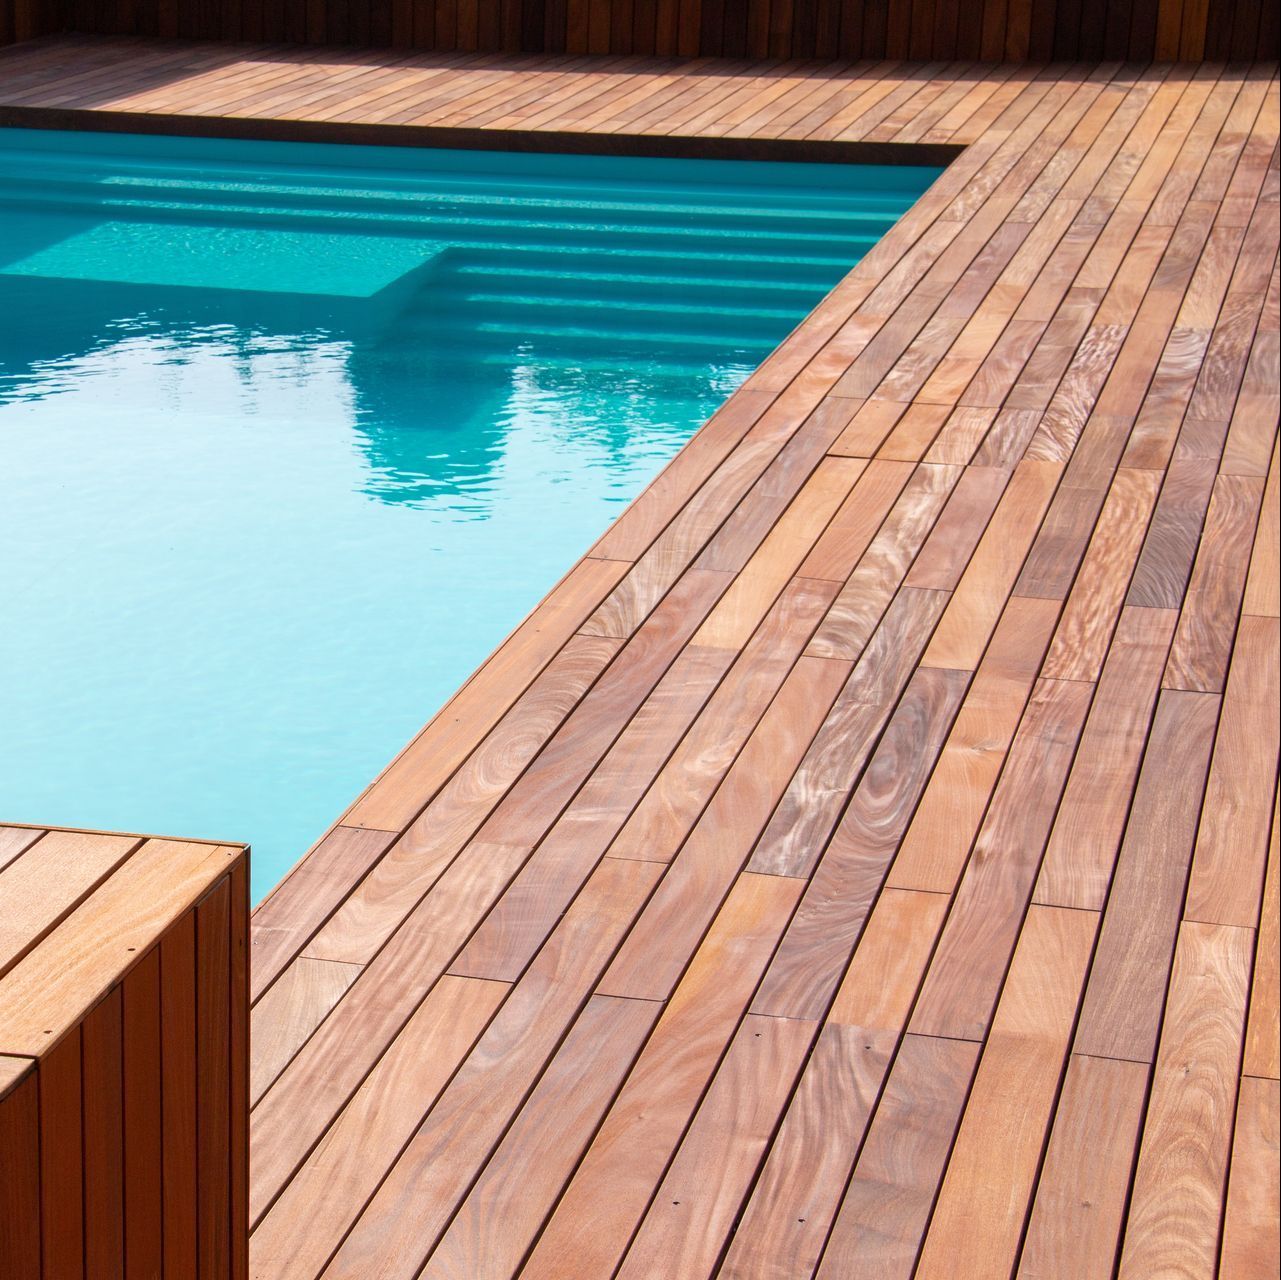 a wooden deck with a swimming pool in the background